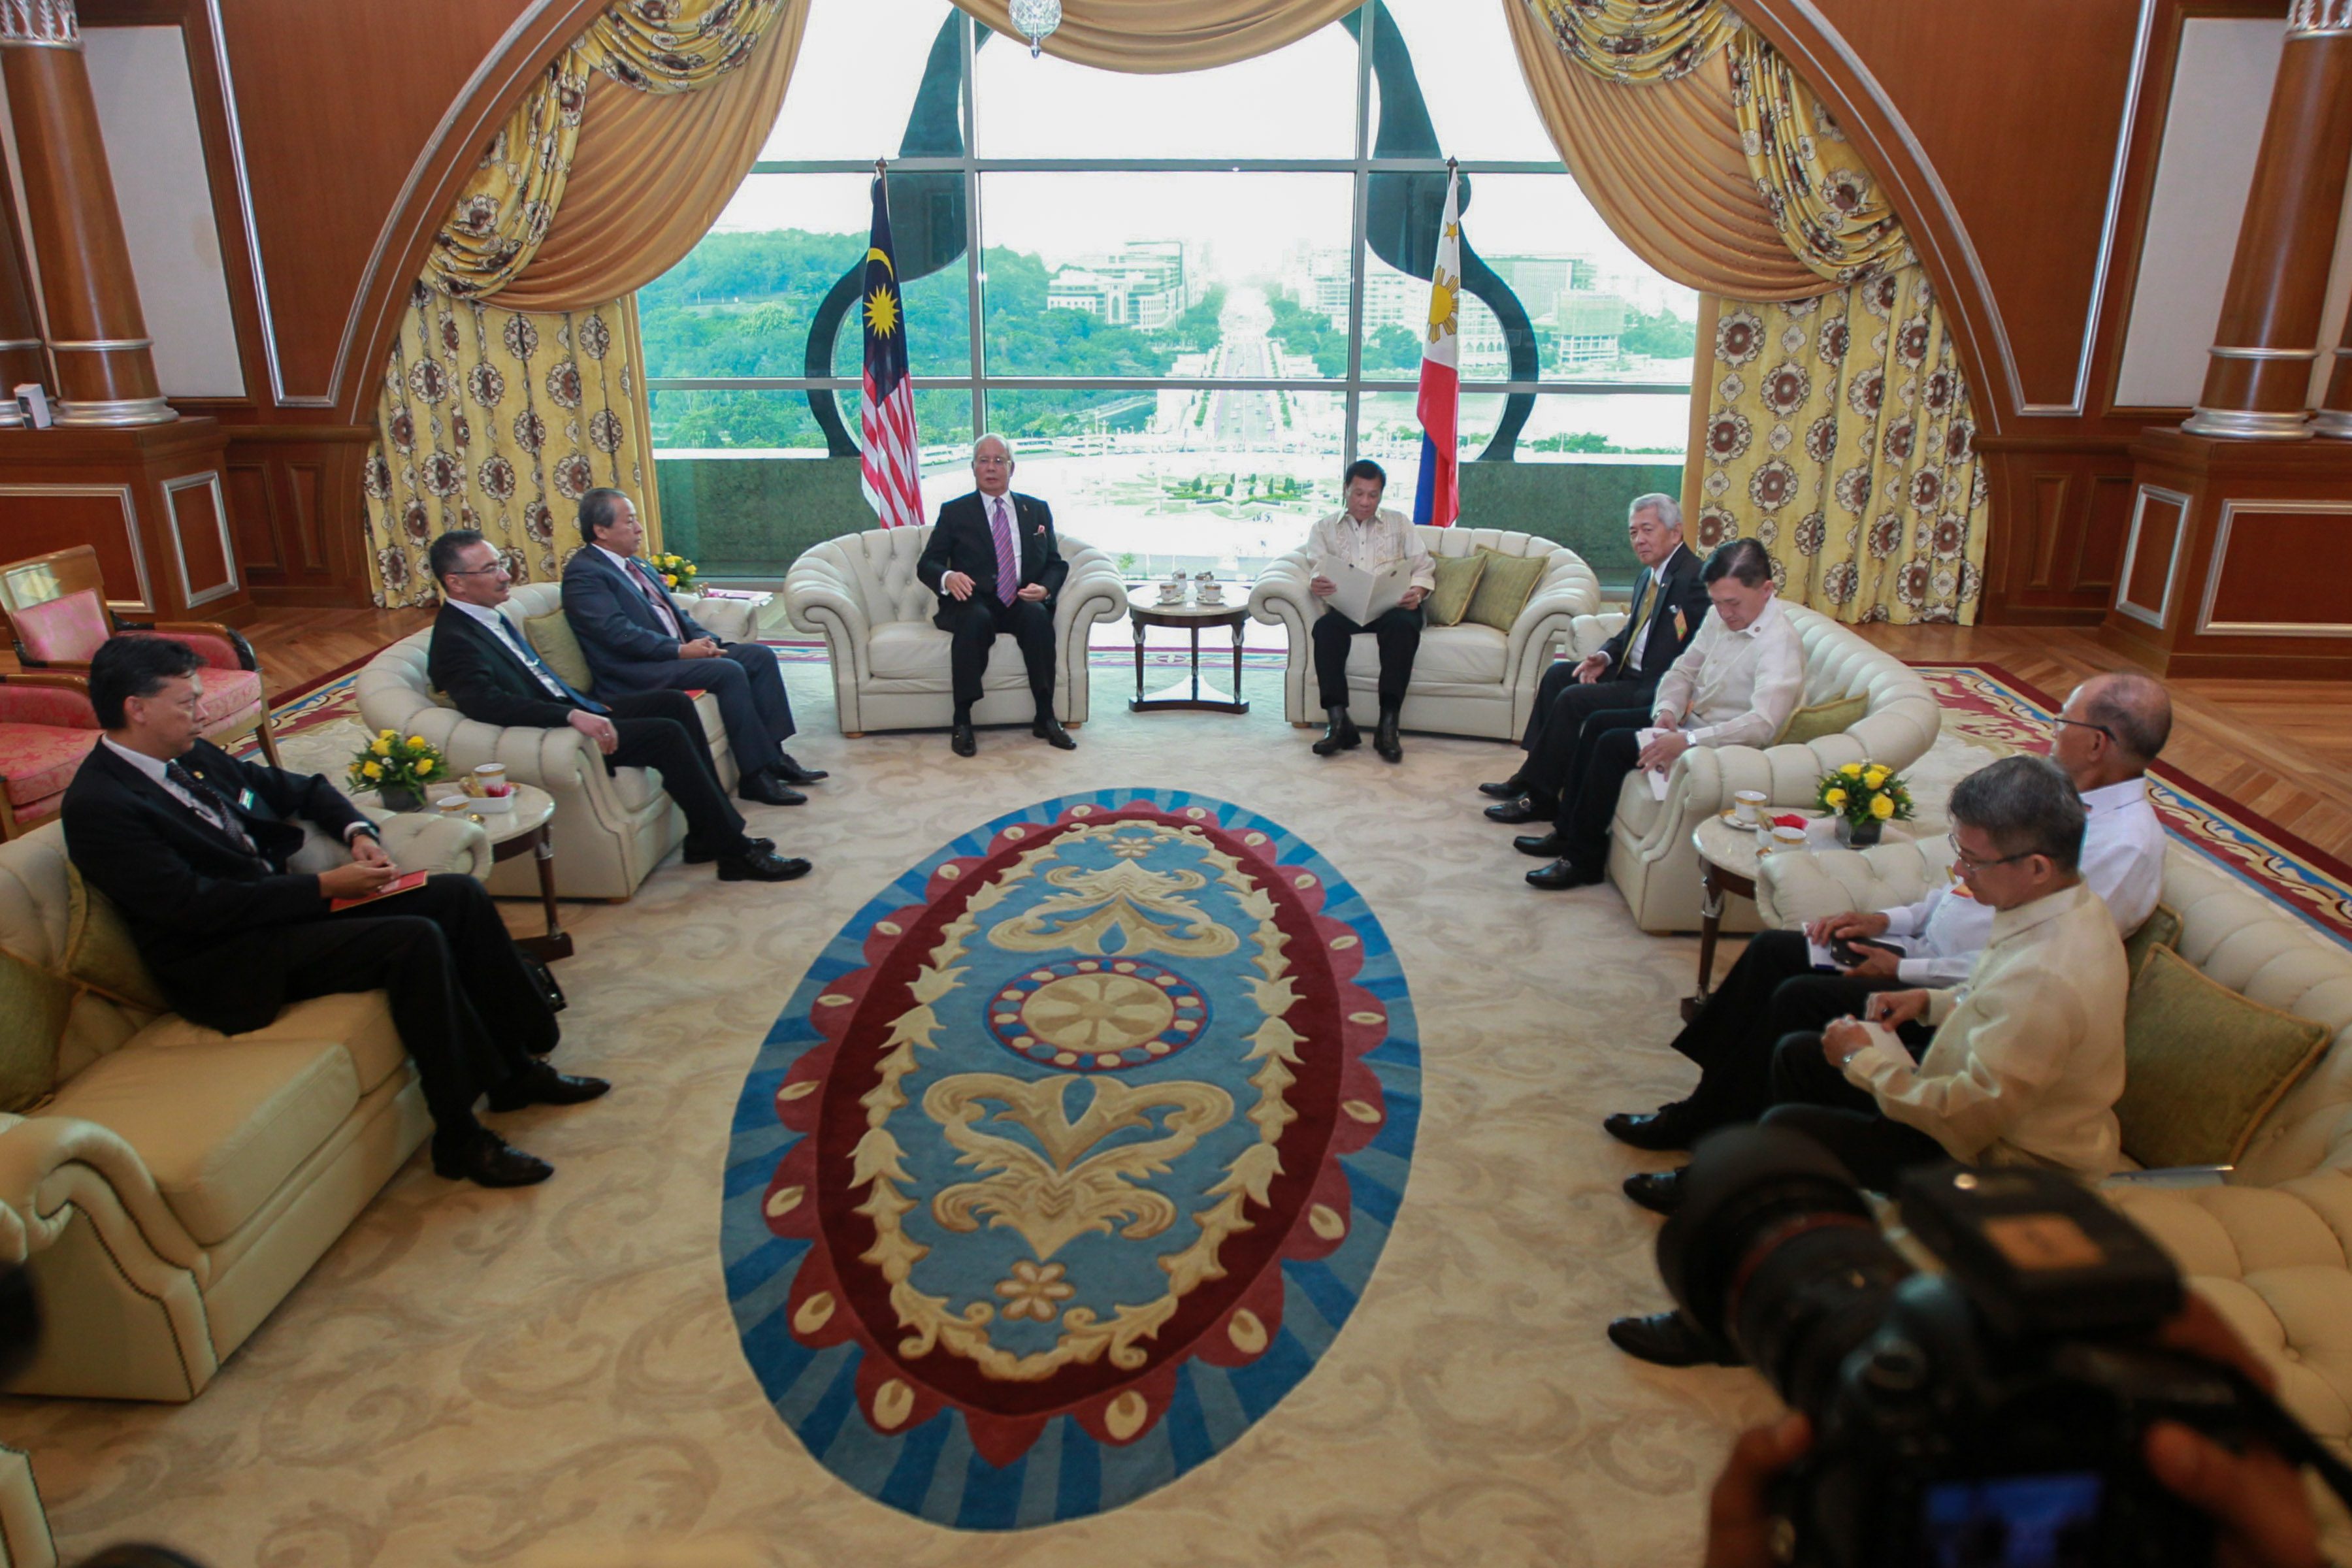 FIRST MEETING. President Duterte and members of his delegation attend a meeting with Malaysian Prime Minister Najib Razak at the Prime Minister's Office in Perdana square, Putrajaya 